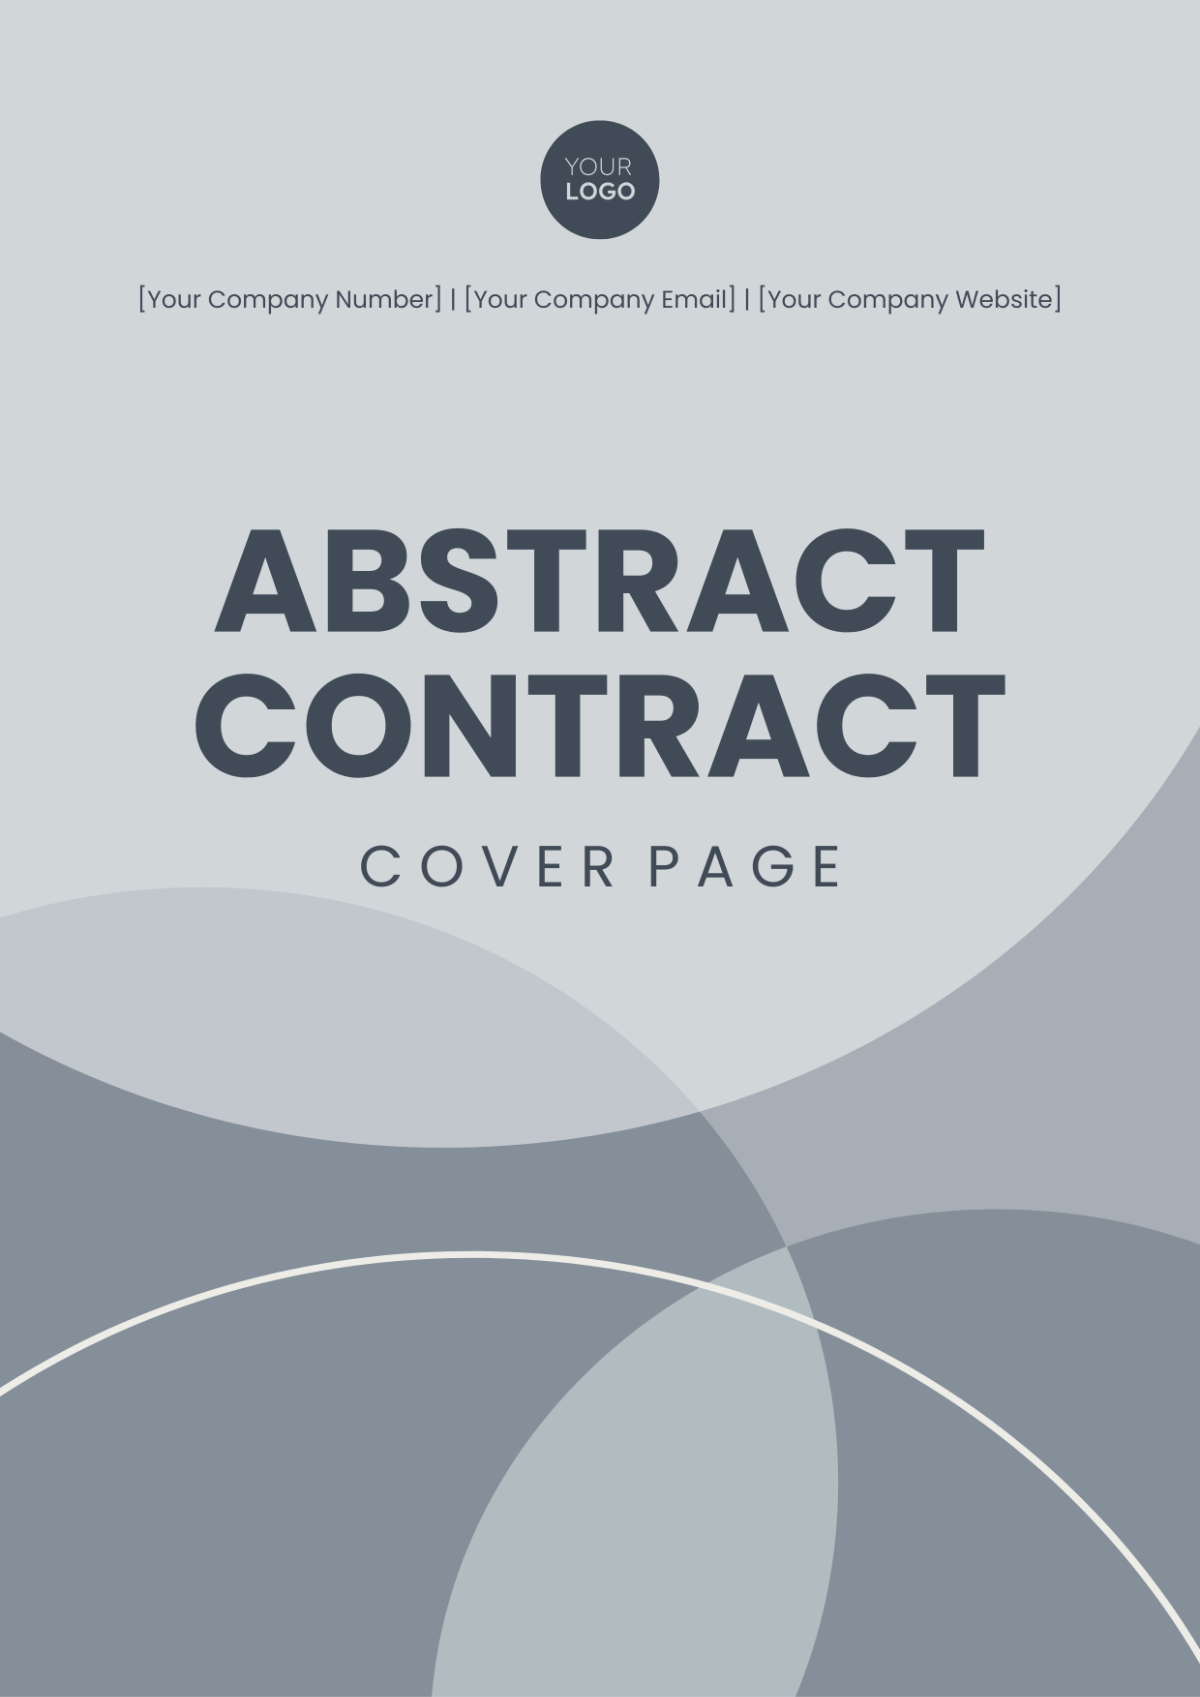 Free Abstract Contract Cover Page Template